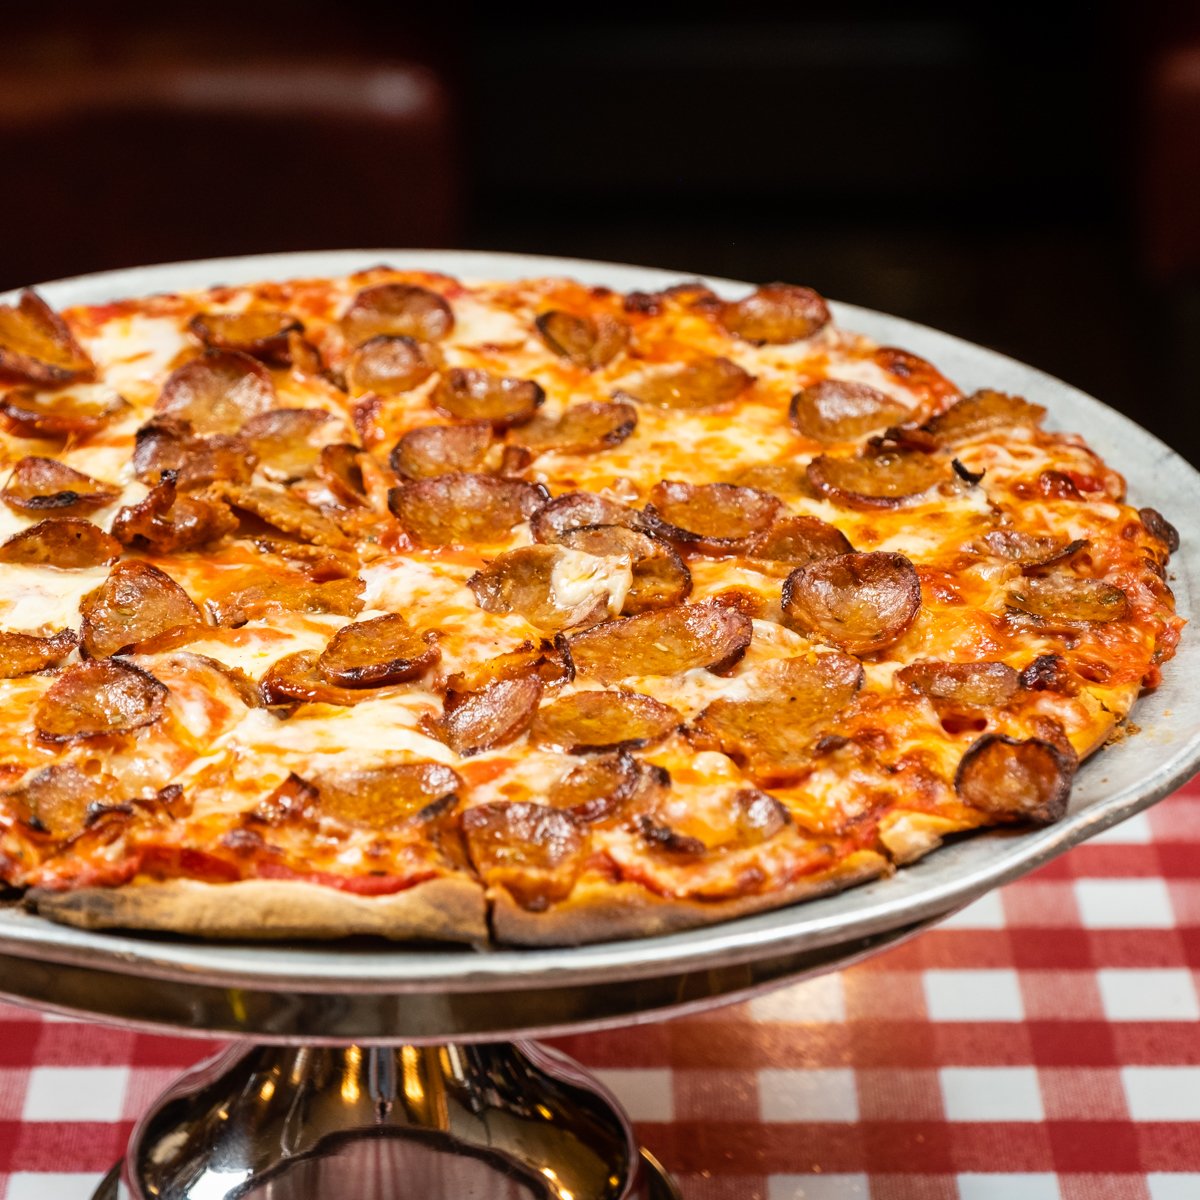 Oh, the weather outside is frightful, but our pizza is so delightful. 🎶  #WhatHorse? 🤷‍♀️🤷🤷‍♂️🍕🐎?  #KinchleysTavern #CheckeredTabletops #KinchleysPizza #ThinCrustPizza  #Kinchleys #Pizza #FullBar #KinchleysNJ #FamilyFriendly #KinchleysThinCrust #LocalFavorite #RamseyNJ